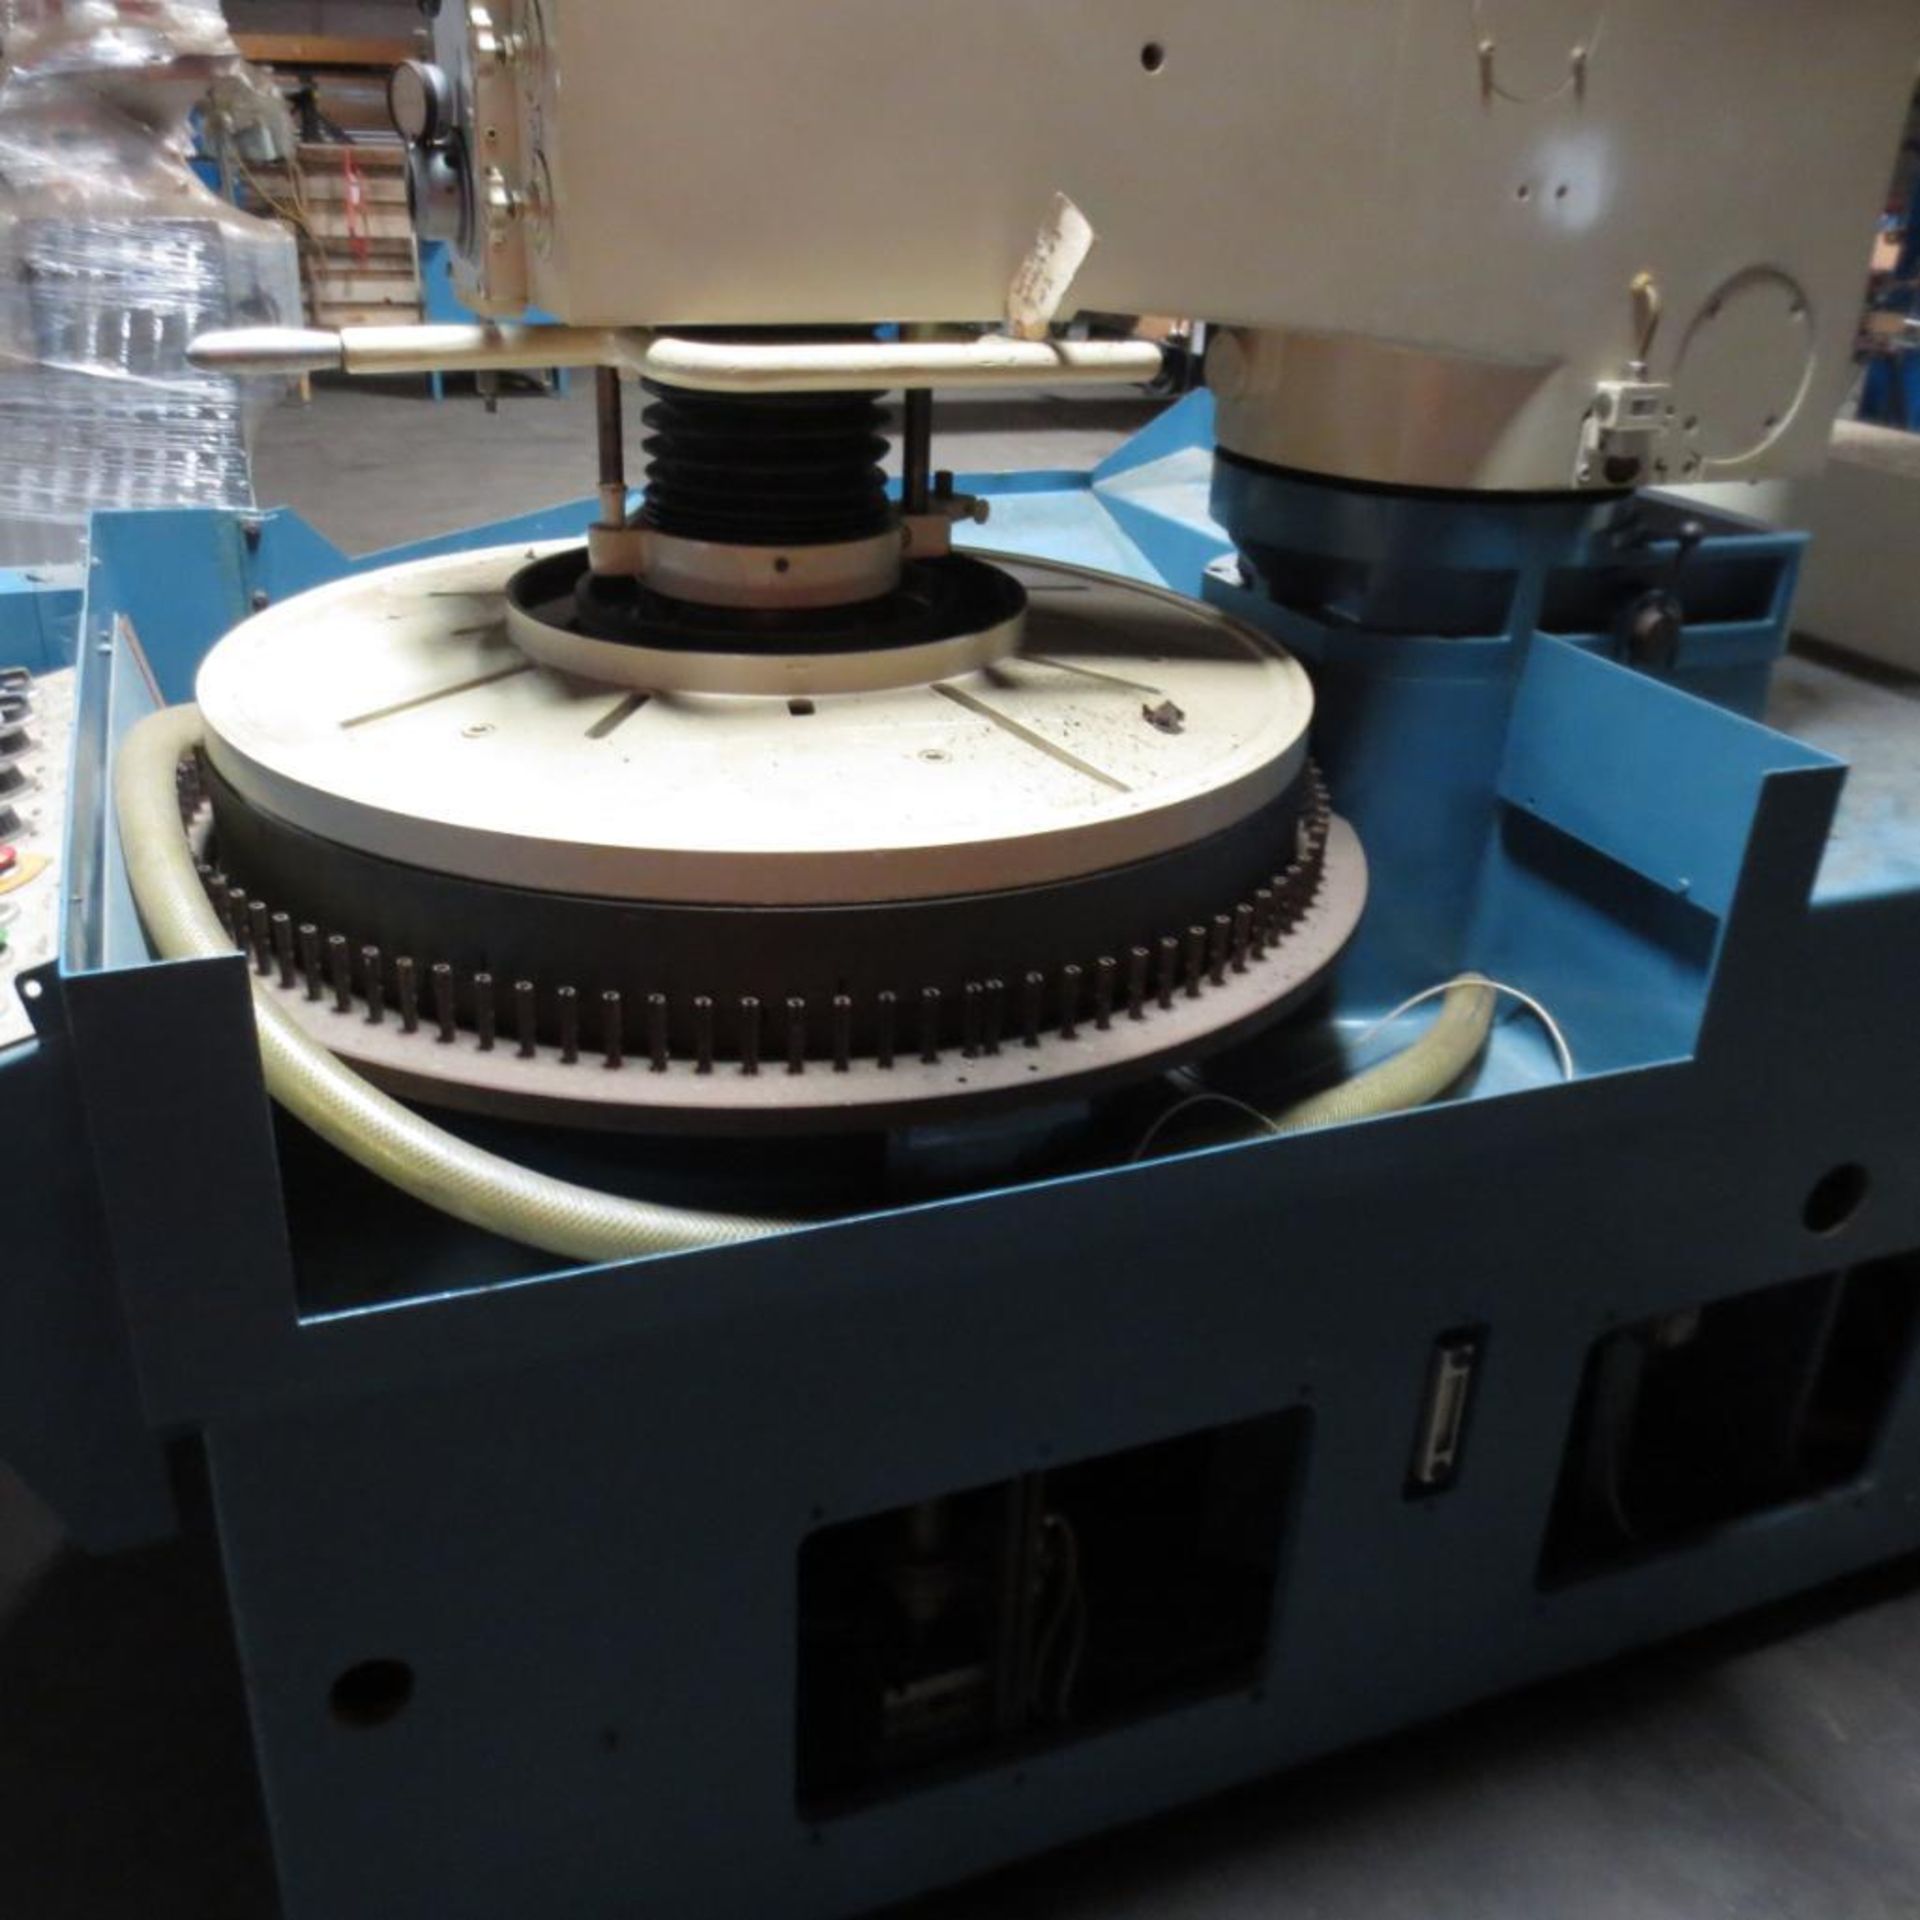 Peter Wolters 30" Type AL2 Rotary Lapping Machine S/N: 366, 3-KW Spindle Drive. Loading Fee is $550. - Image 5 of 6